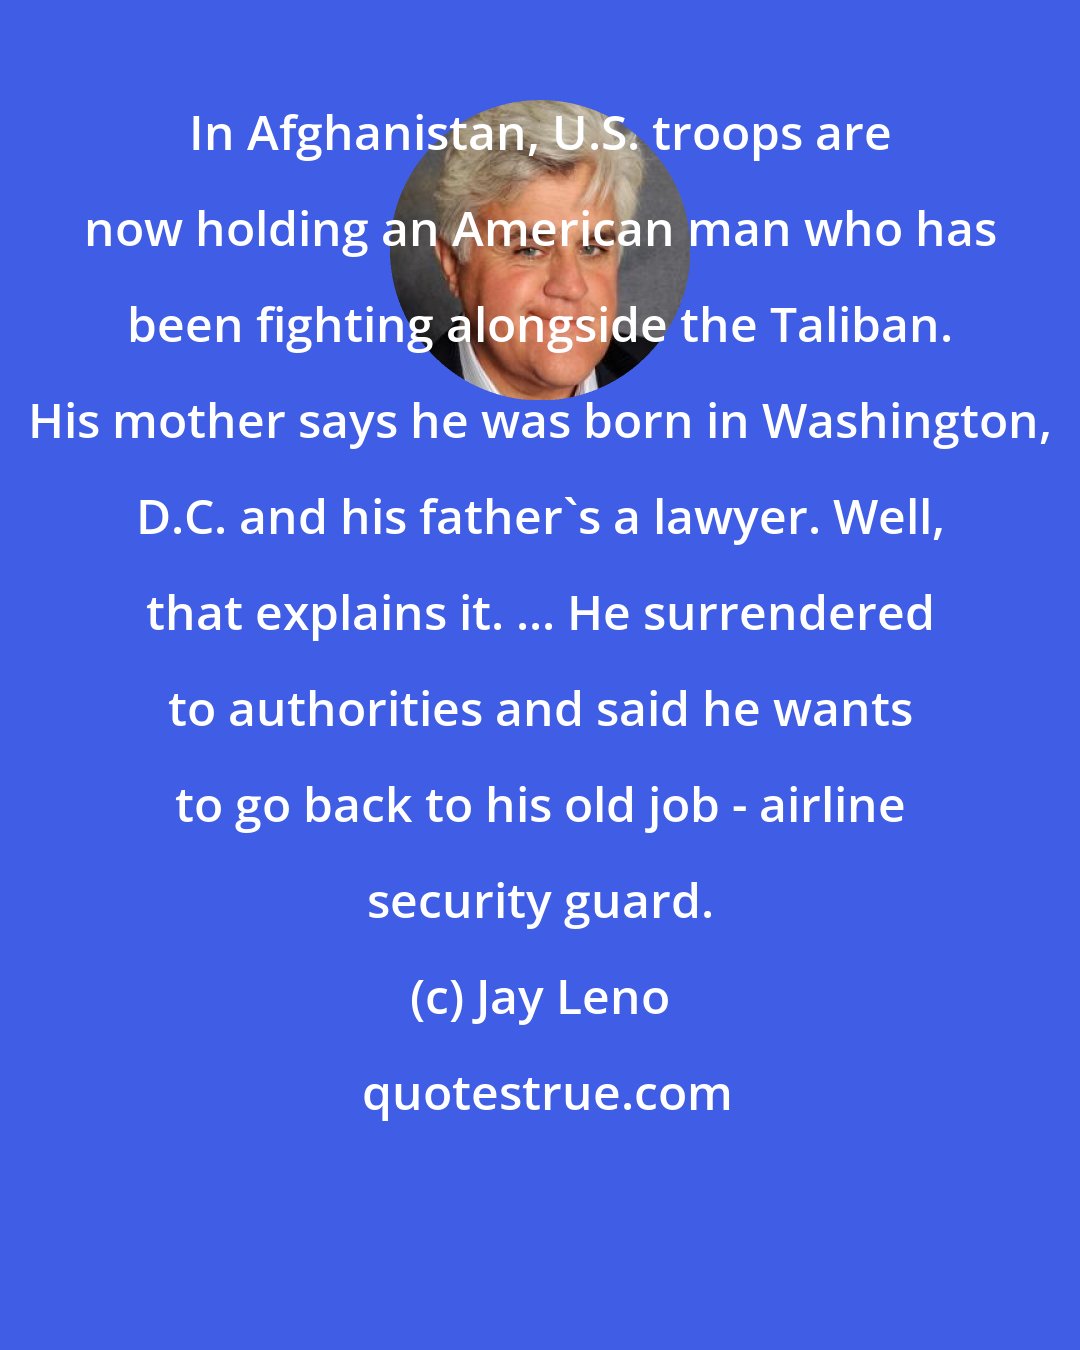 Jay Leno: In Afghanistan, U.S. troops are now holding an American man who has been fighting alongside the Taliban. His mother says he was born in Washington, D.C. and his father's a lawyer. Well, that explains it. ... He surrendered to authorities and said he wants to go back to his old job - airline security guard.